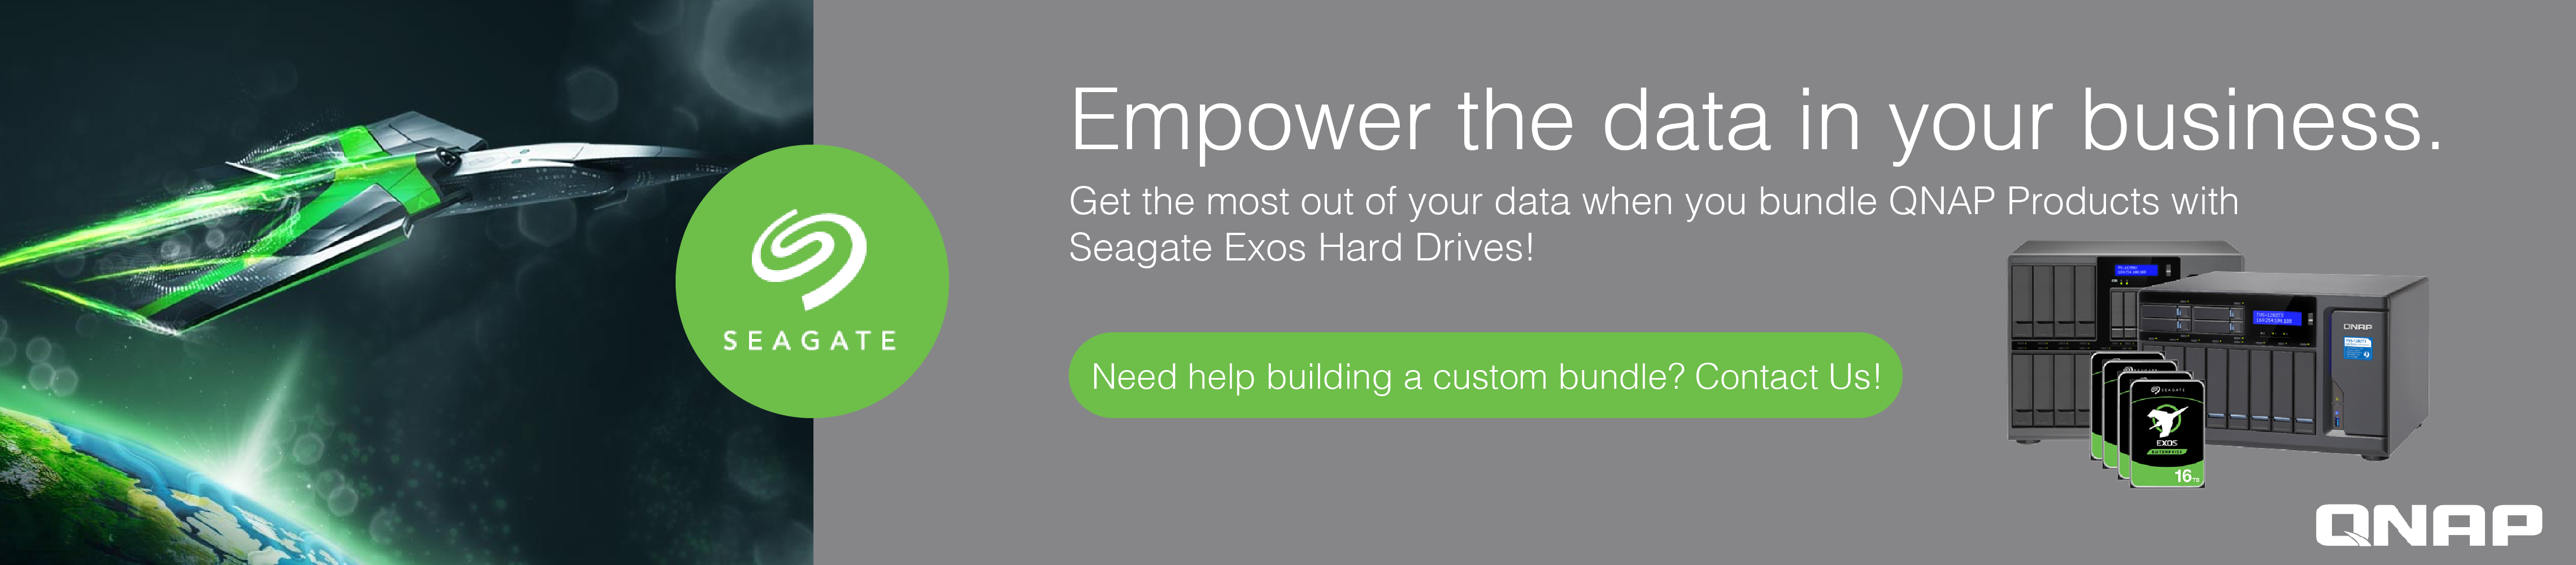 QNAP with Seagate Exos Hard Drives banner